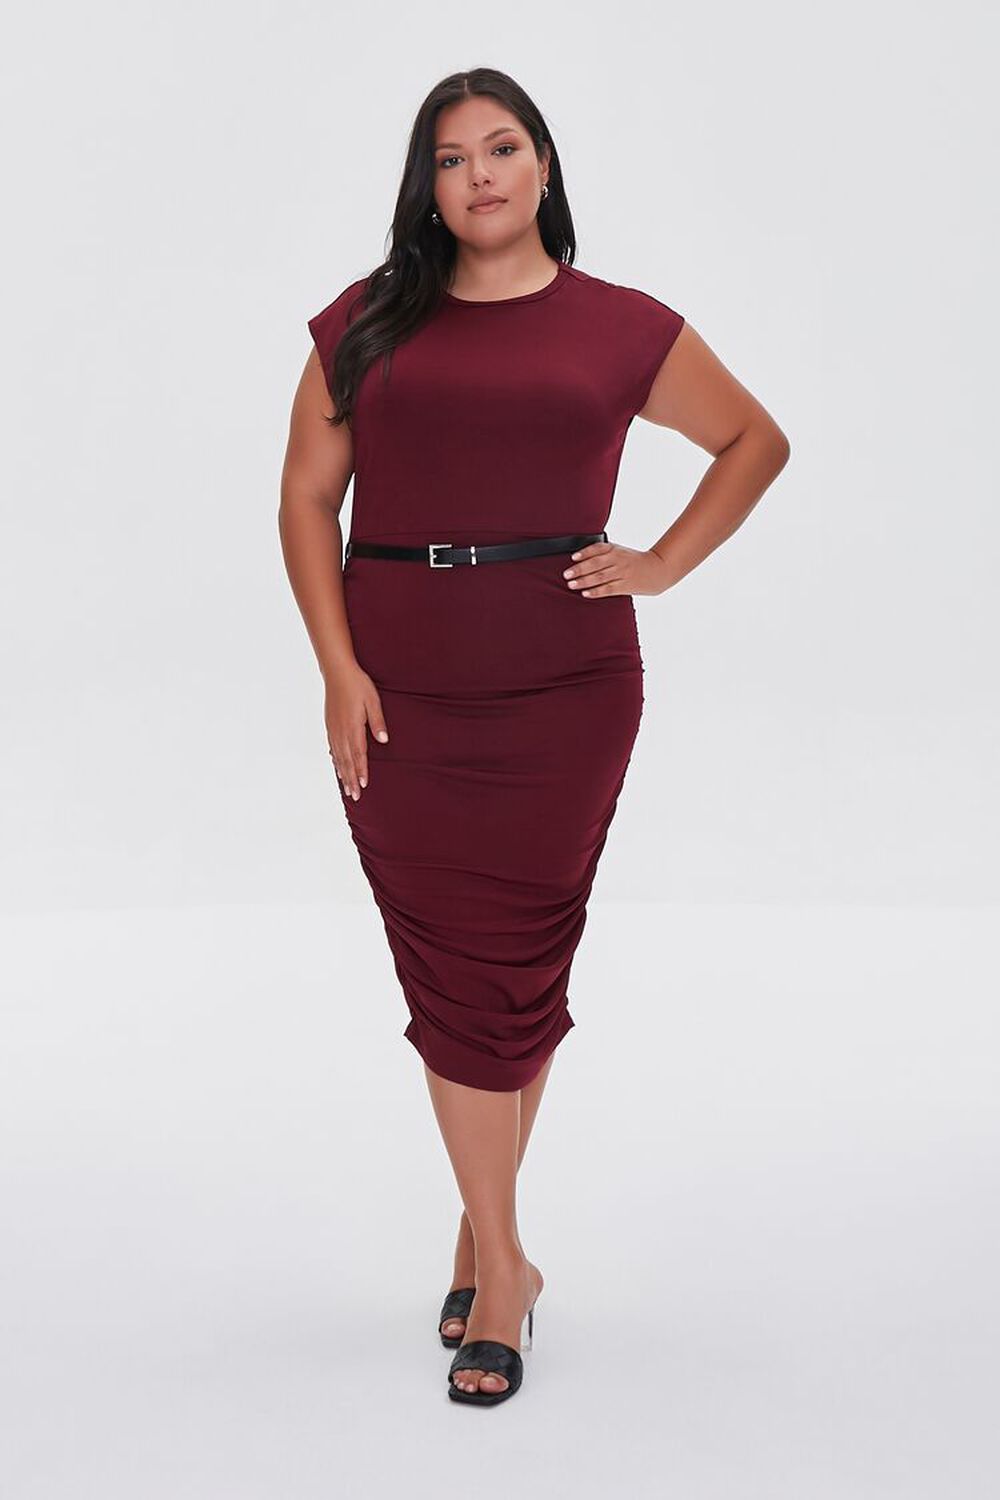 WINE Plus Size Belted Ruched Dress, image 1